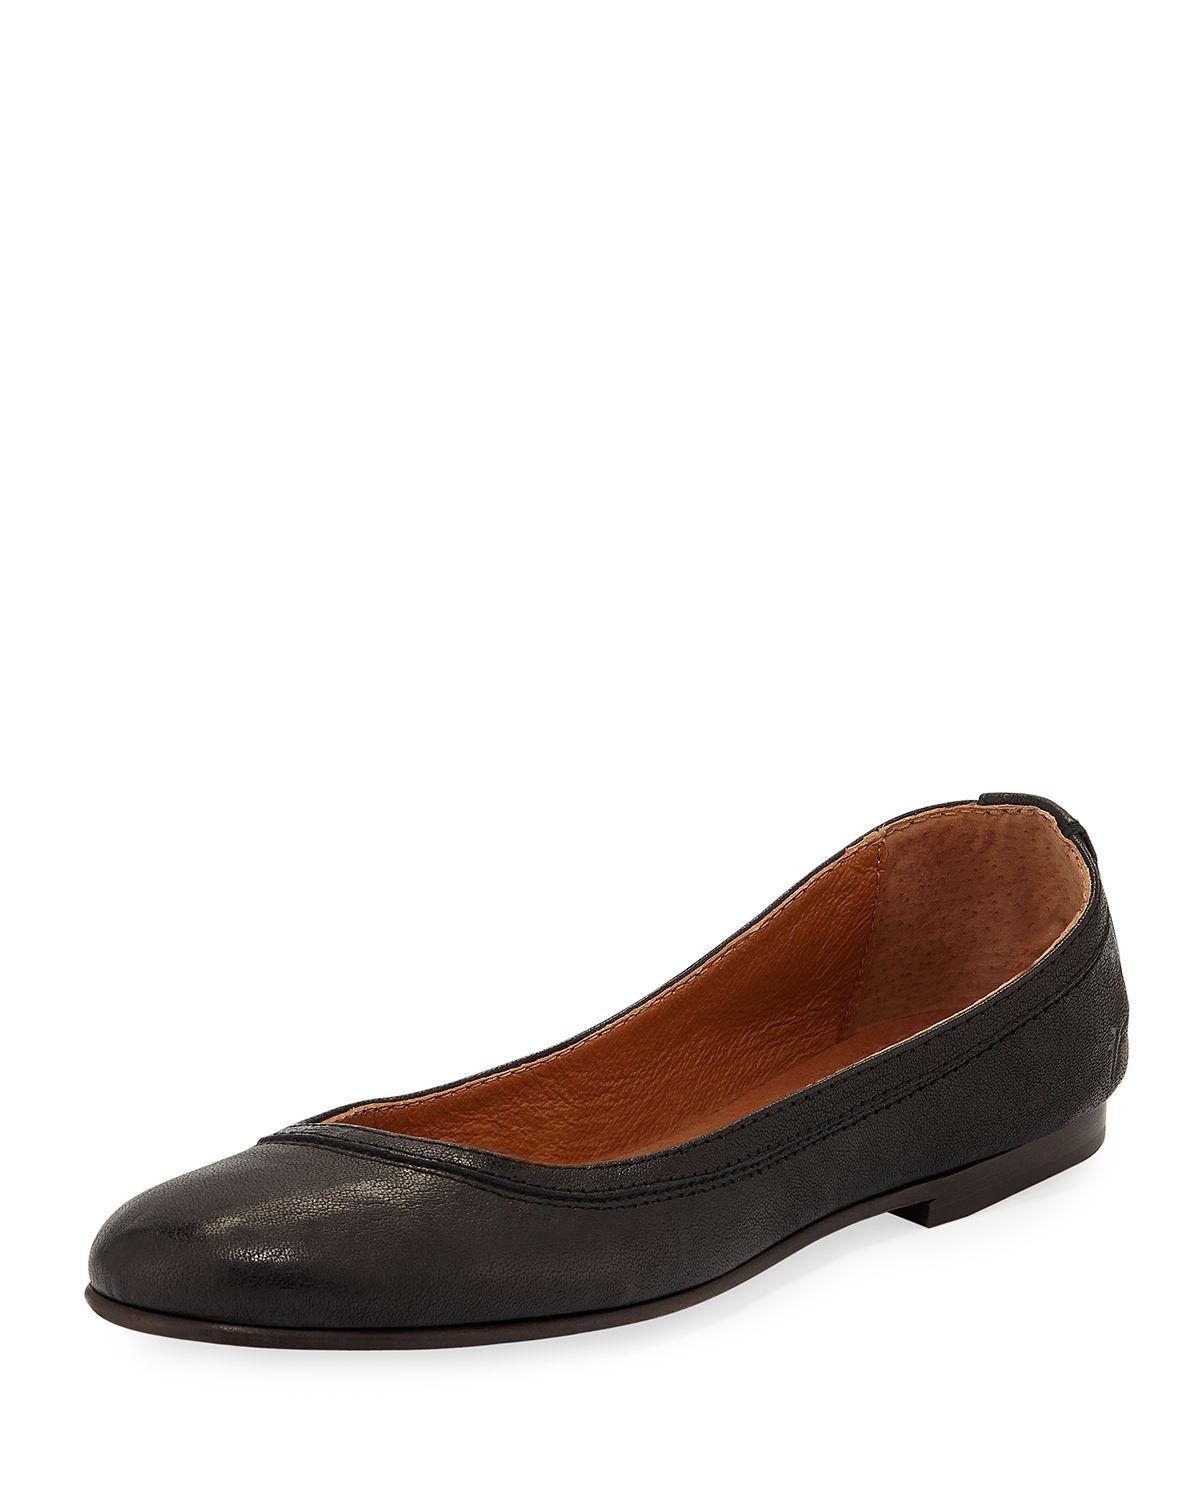 Frye Leather Women's Carson Ballet Flats in Black (Brown) - Save 75% - Lyst